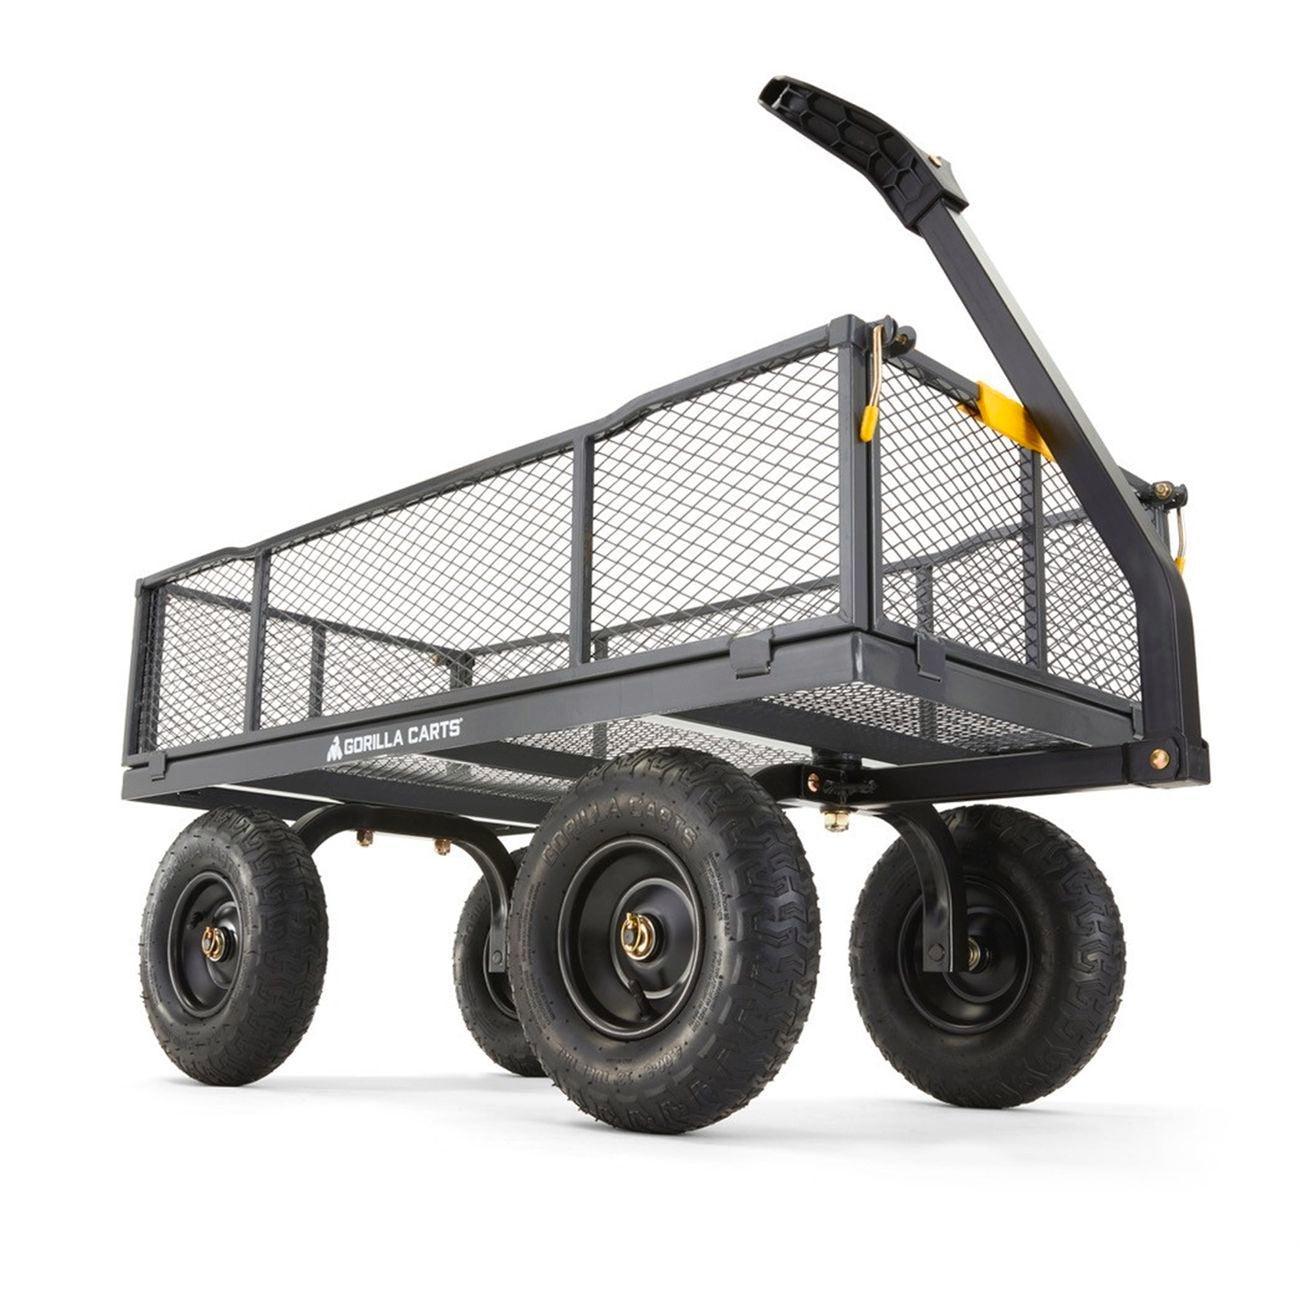 Gorilla Cart GOR4PS Review: Does it Maneuver? Tested by Bob Vila